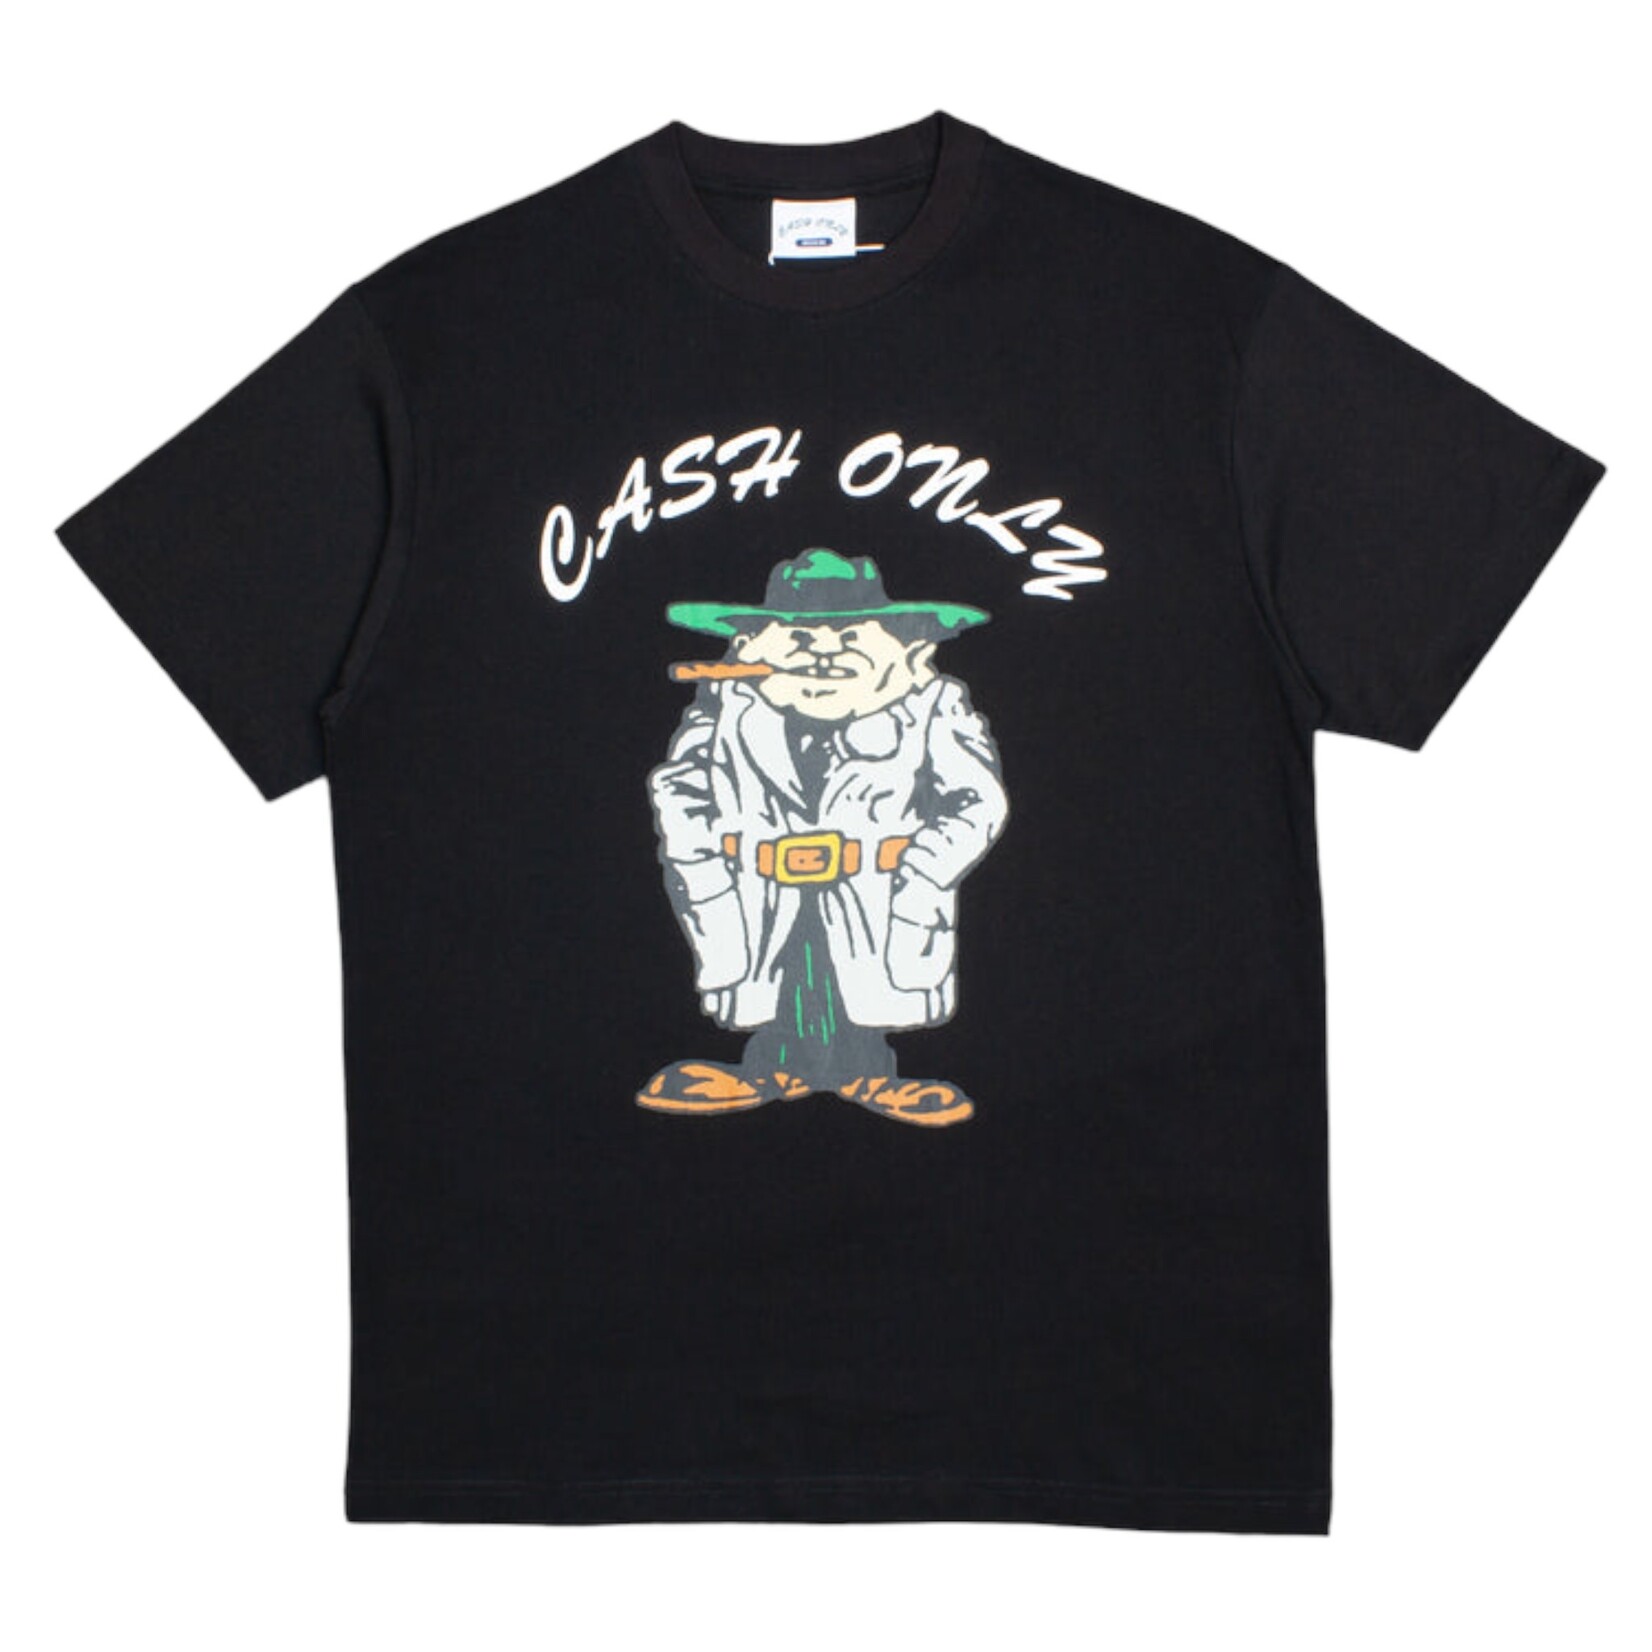 CASH ONLY Cash Only Wise Guy Tee Black